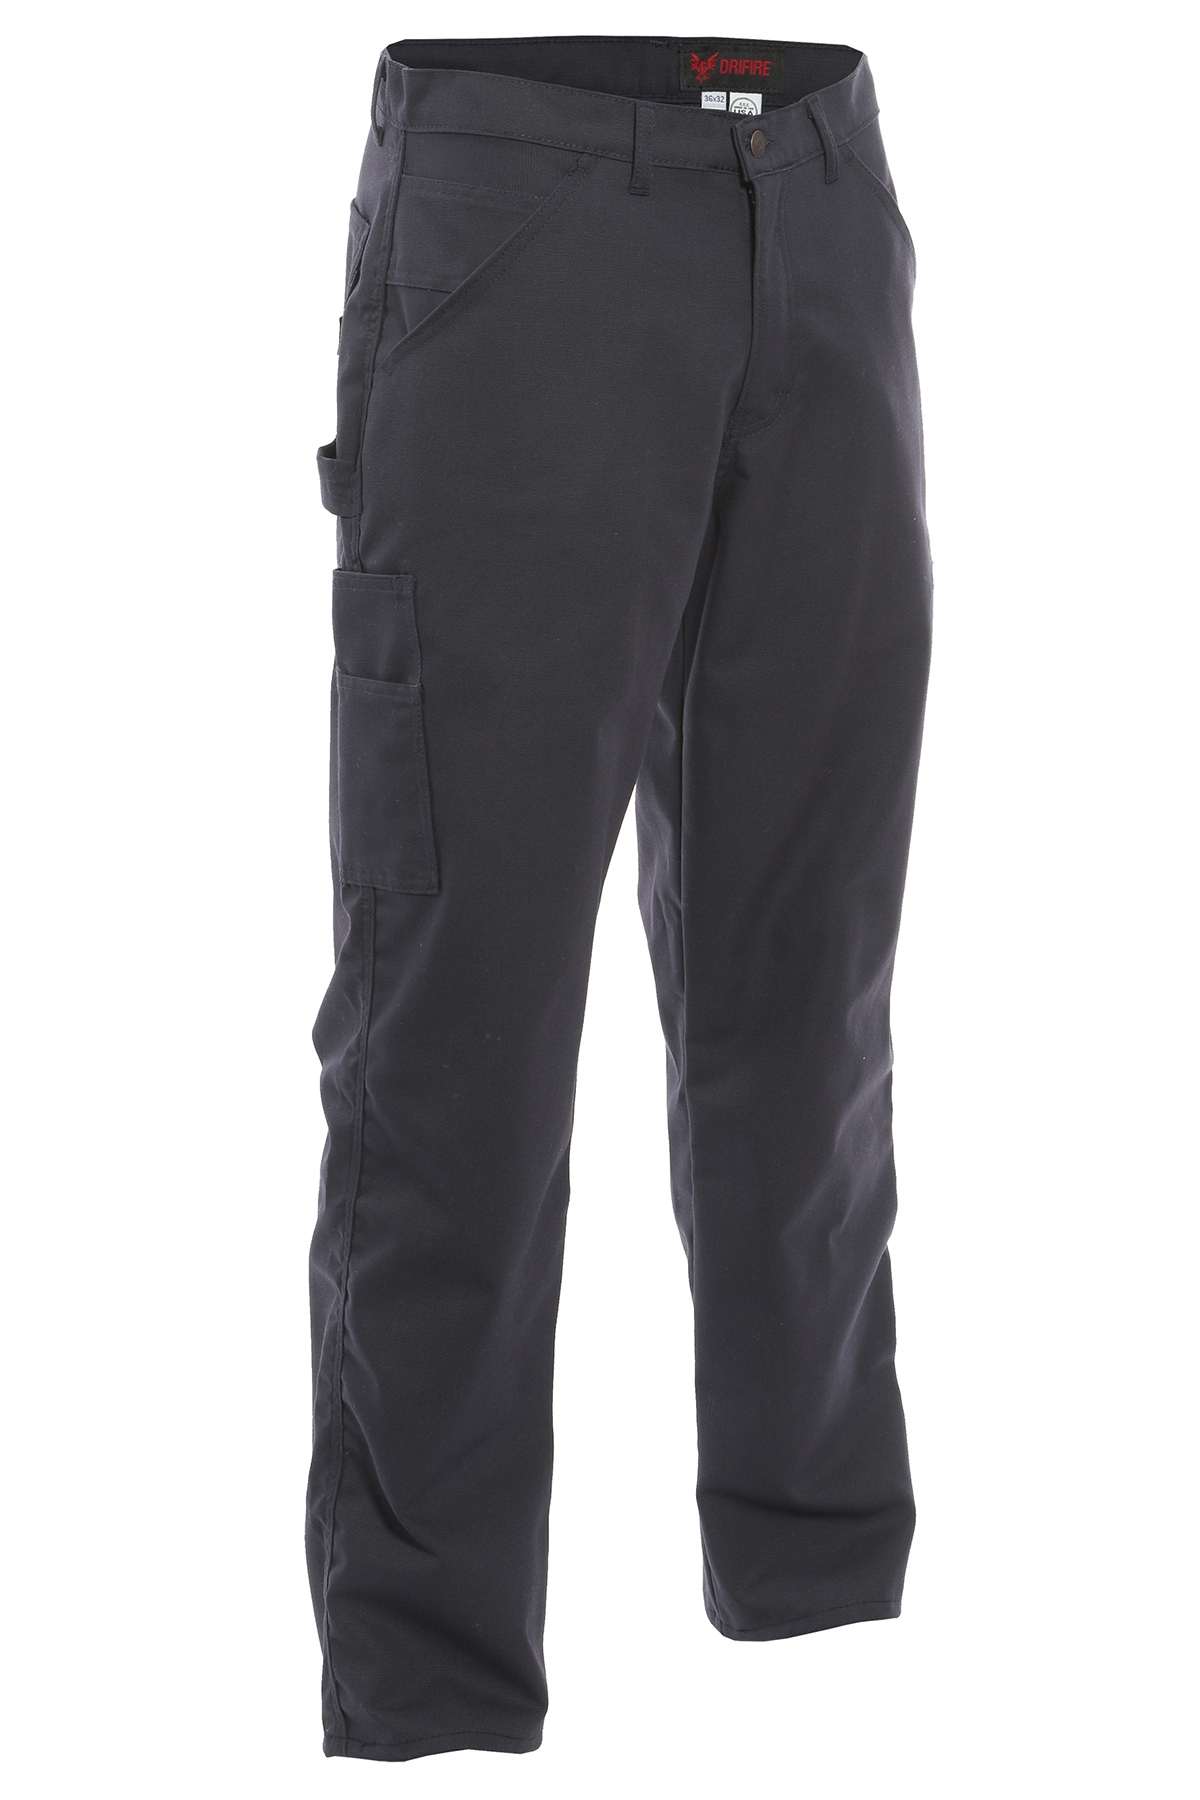 Drifire FR Summer Weight Dungarees, Navy - Quest Safety PPE